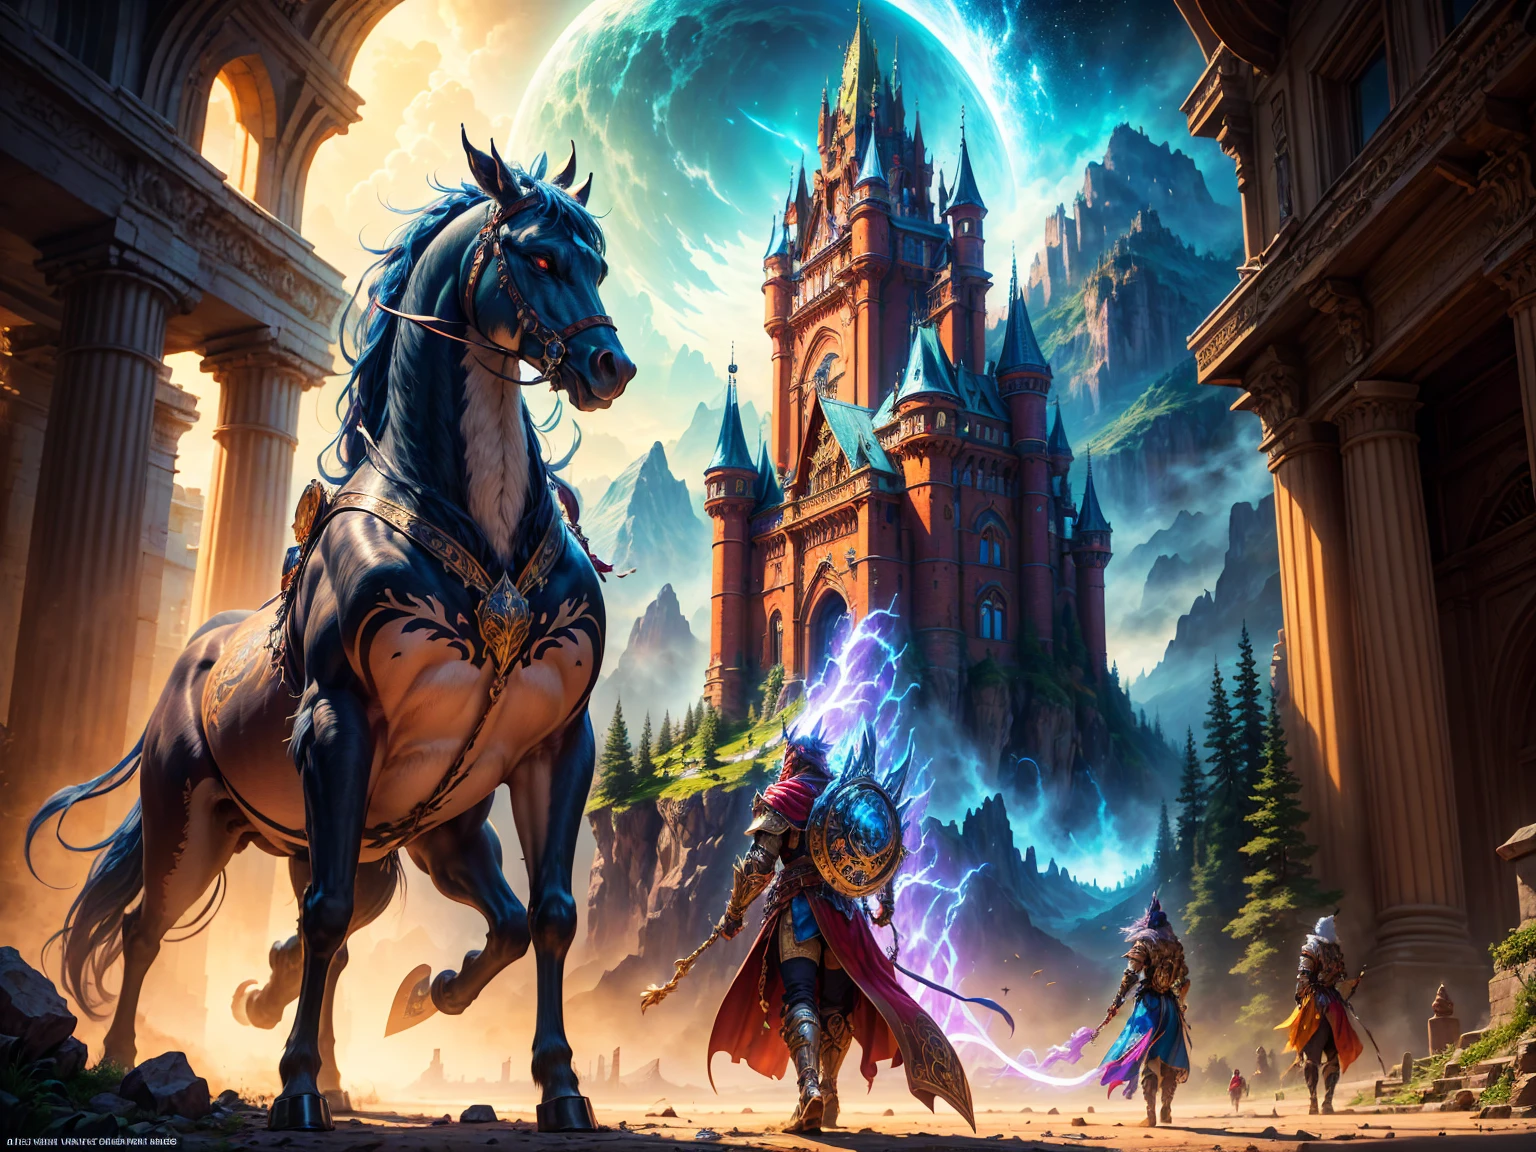 best quality,4k,8k,highres,masterpiece:1.2,ultra-detailed,realistic,photorealistic:1.37,epic fantasy scenes,brave warriors,mythical creatures,majestic castles,spectacular landscapes,imagination,world of fantasy,adventure,universe of magic,fantastic worlds,detailed characters,strong warriors,majestic creatures,magical beings,impressive castles,breathtaking landscapes,fantasy art,imagination,mythical creatures,detailed armor and weapons,ornate castles,towering mountains,mysterious forests,enchanted landscapes,vivid colors,rich color palette,dramatic lighting,ambient light,magical atmosphere,awe-inspiring landscapes,emotive characters,heroic poses,action-packed scenes,epic battle scenes,beyond human imagination,unexplored realms,unprecedented detail,fantastic realms, colorido, hermosos colores ,HD.